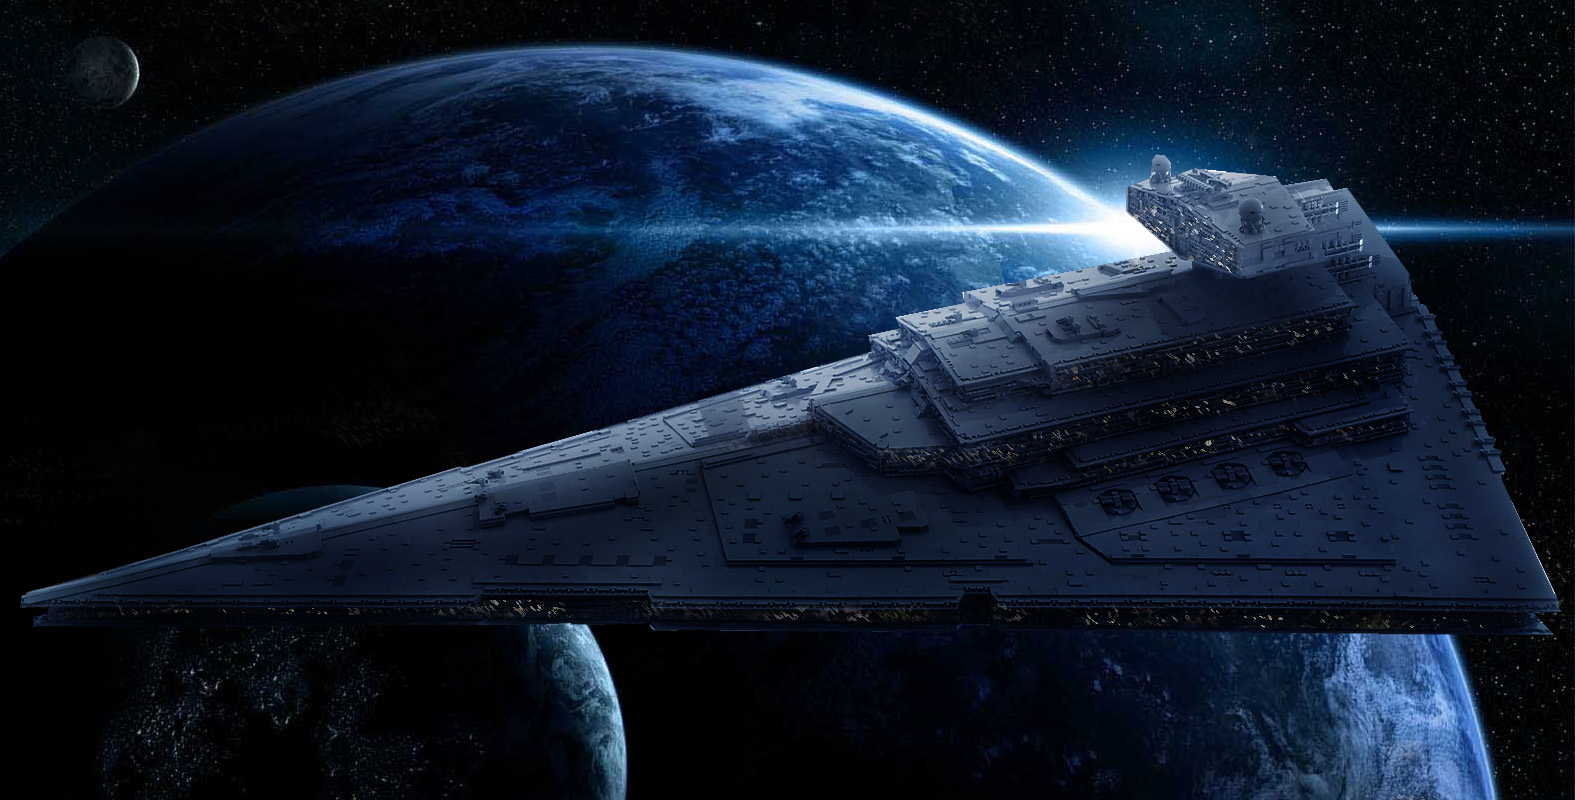 Wallpaper Star Wars Spaceship Imperial Destroyer Car Pictures